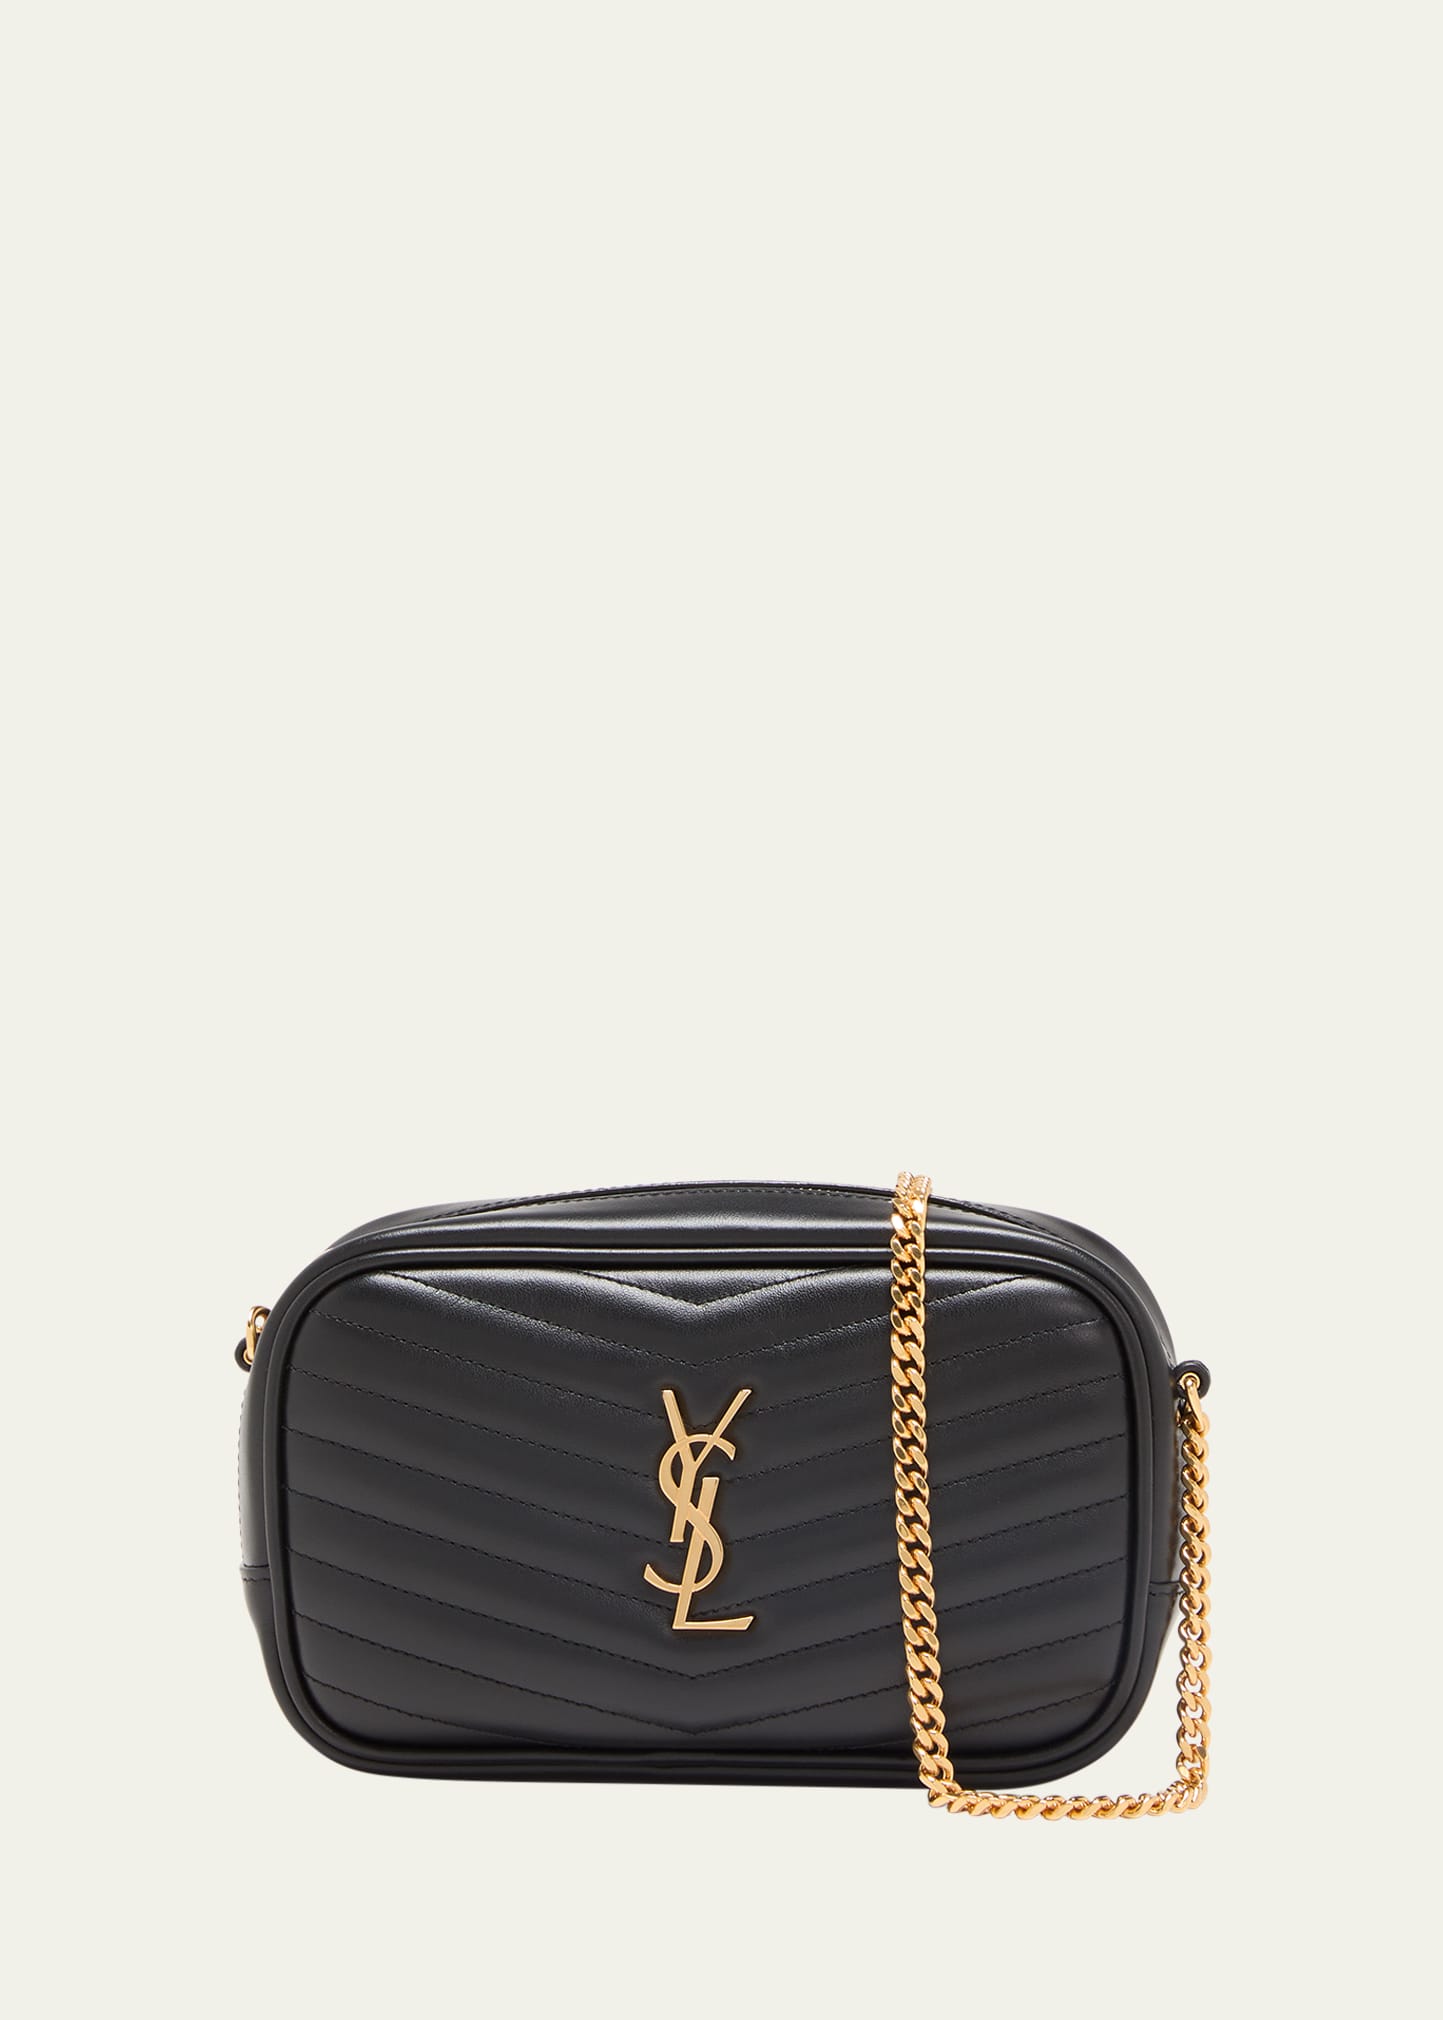 SAINT LAURENT LOU MINI YSL CAMERA BAG IN SMOOTH QUILTED LEATHER